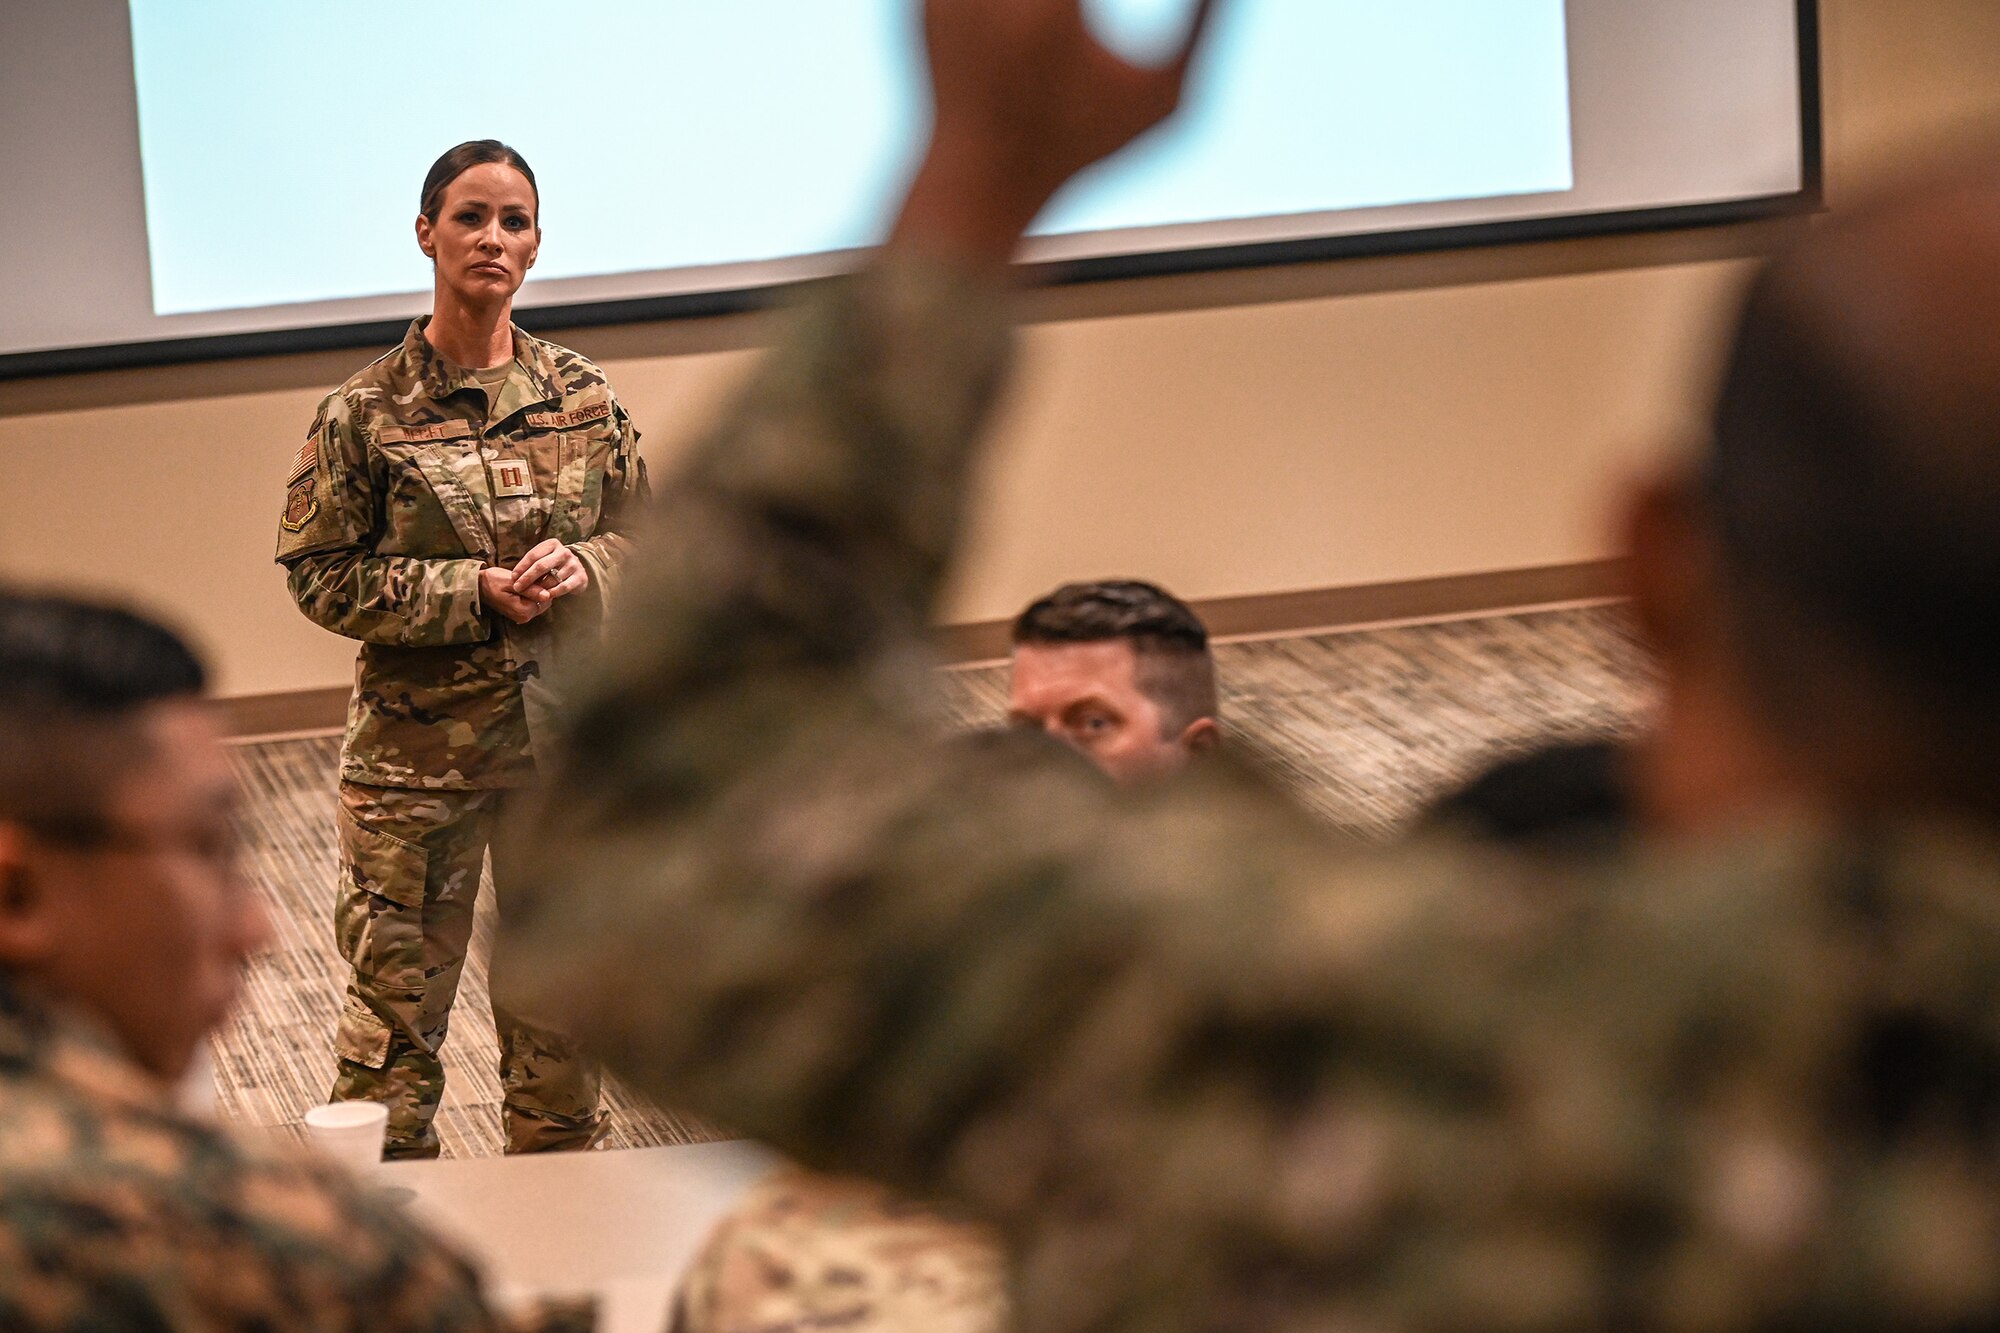 U.S. Air Force Capt. Sara Hecht, an assistant officer in charge assigned to the 131st Bomb Wing at Jefferson Barracks Air National Guard Base, Missouri, answers questions during an Innovative Readiness Training Program at Poplar Bluff, Missouri, June 10, 2023. The DOD sponsored program is designed to build relationships with local communities by providing key medical and dental services while simultaneously providing real-world training experience. (U.S. Air National Guard photo by Airman 1st Class Danielle Dawson)